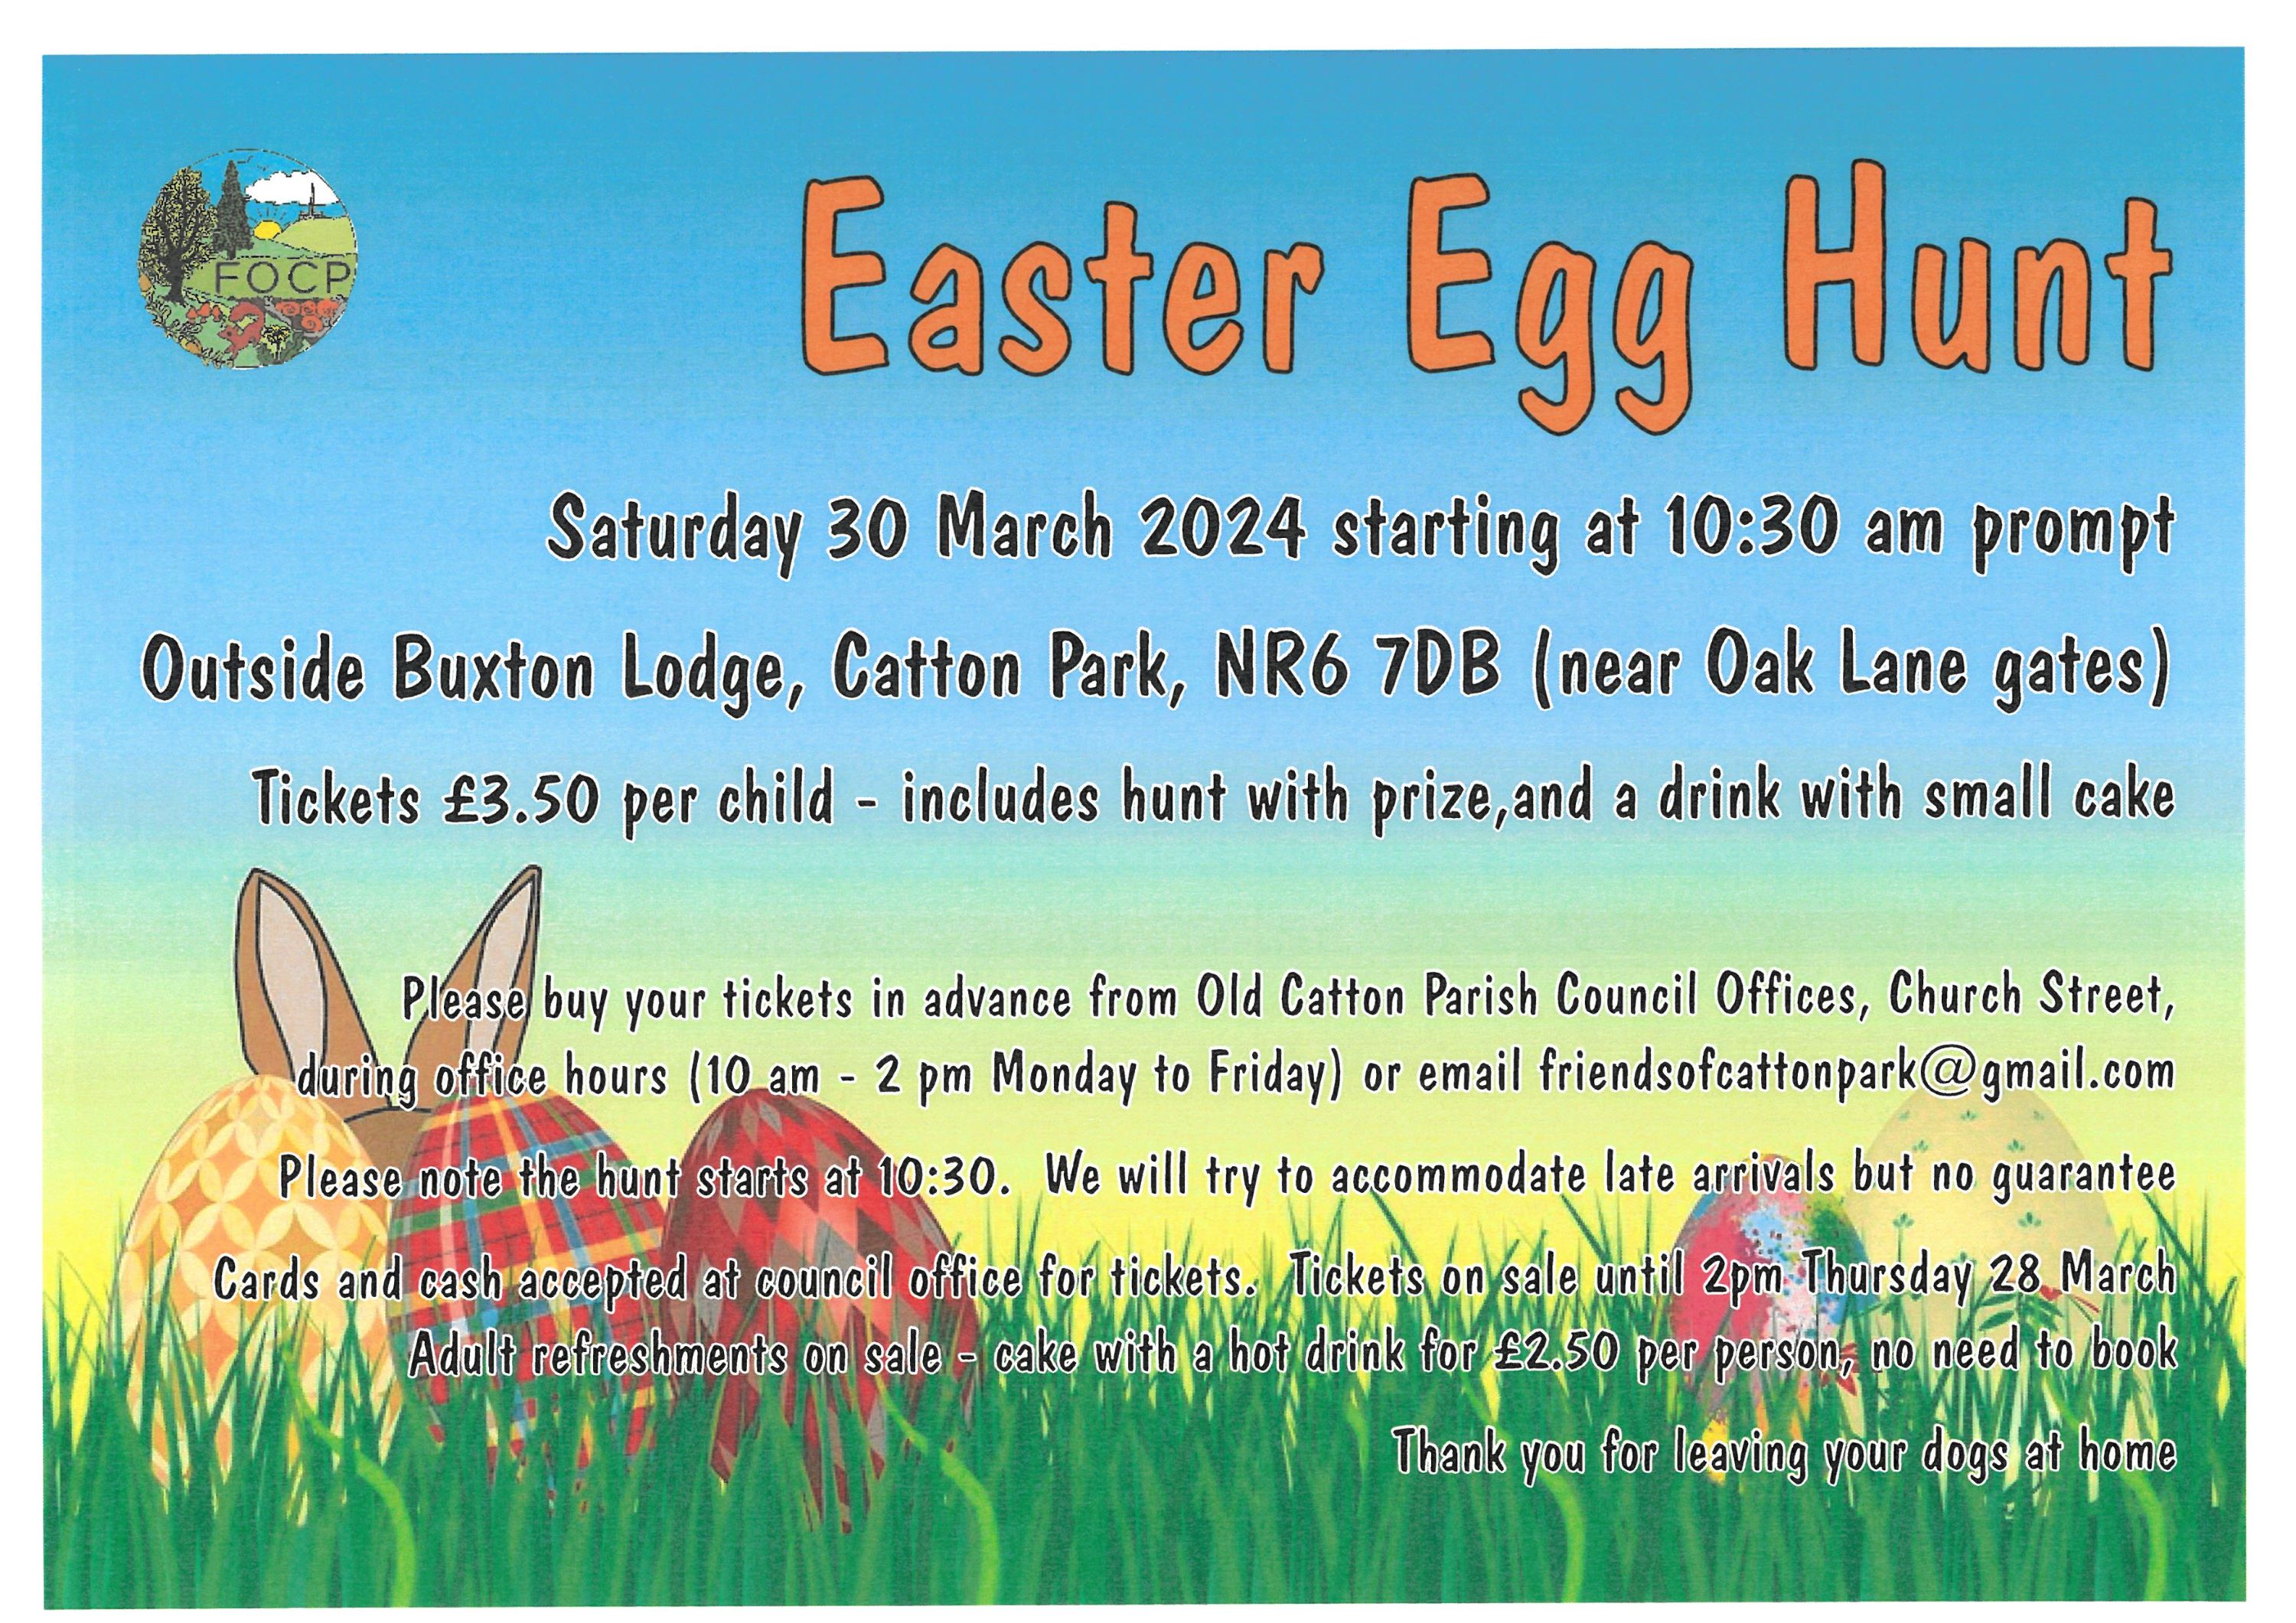 Friends of Catton Park Easter Egg Hunt - March 2024